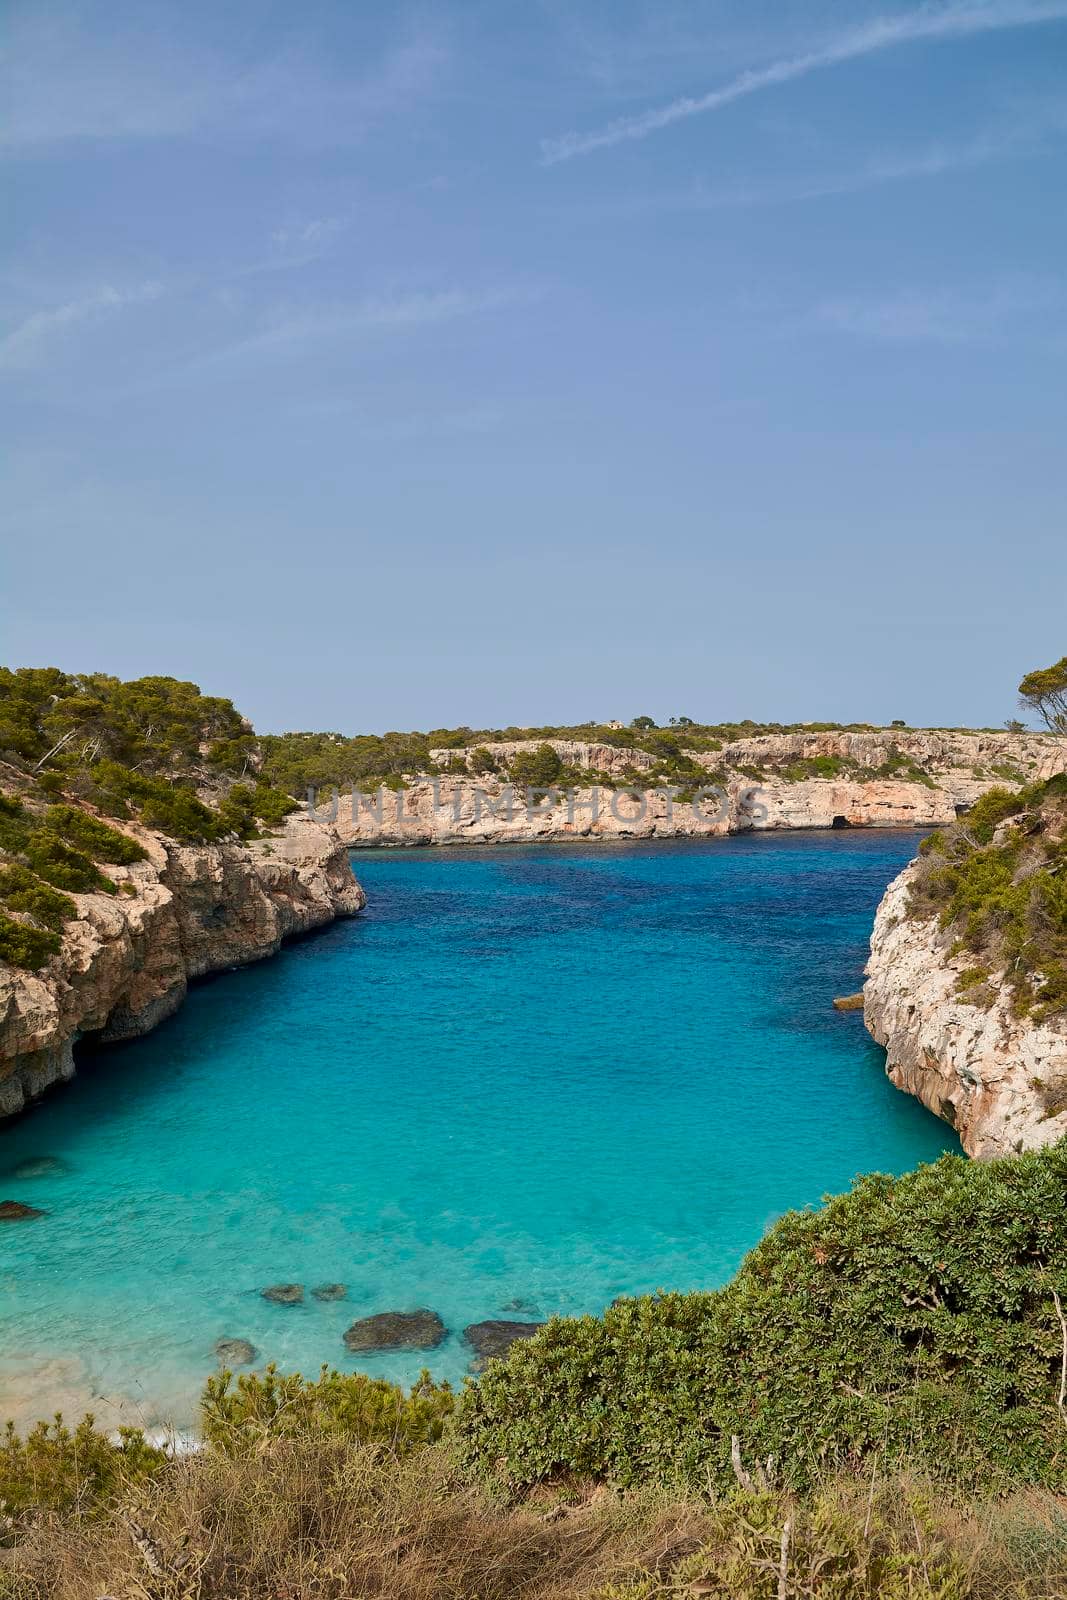 Paradise beach of the mediterranean sea, turquoise water, yes people, cliffs, rocks, white sand, Balearic Islands, Spain